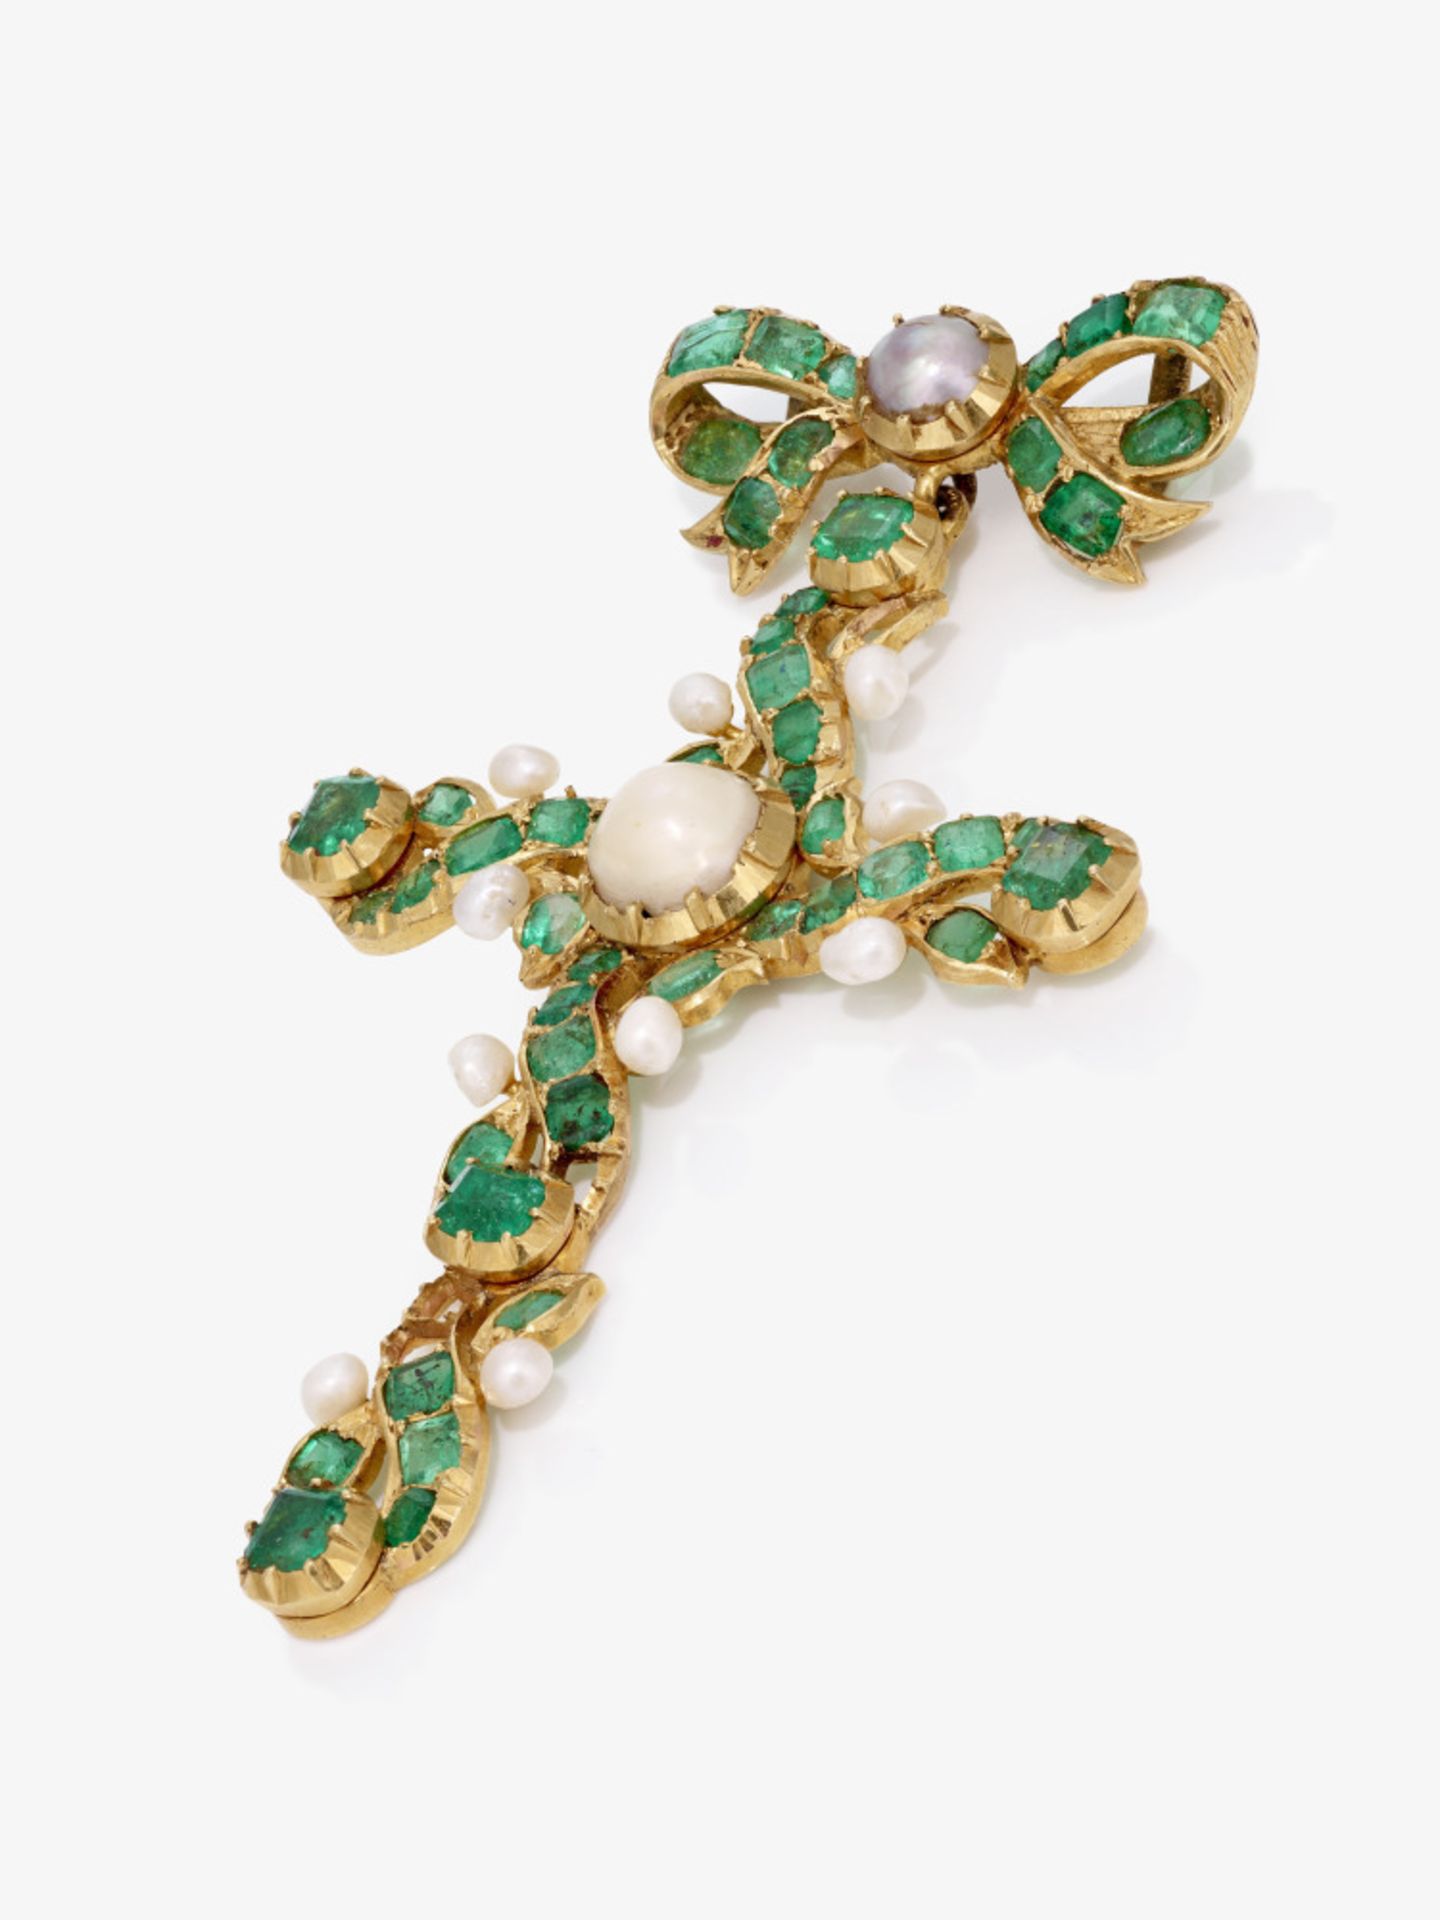 Cross pendant with emeralds and river pearls - Austria, circa 1870 - Image 2 of 2